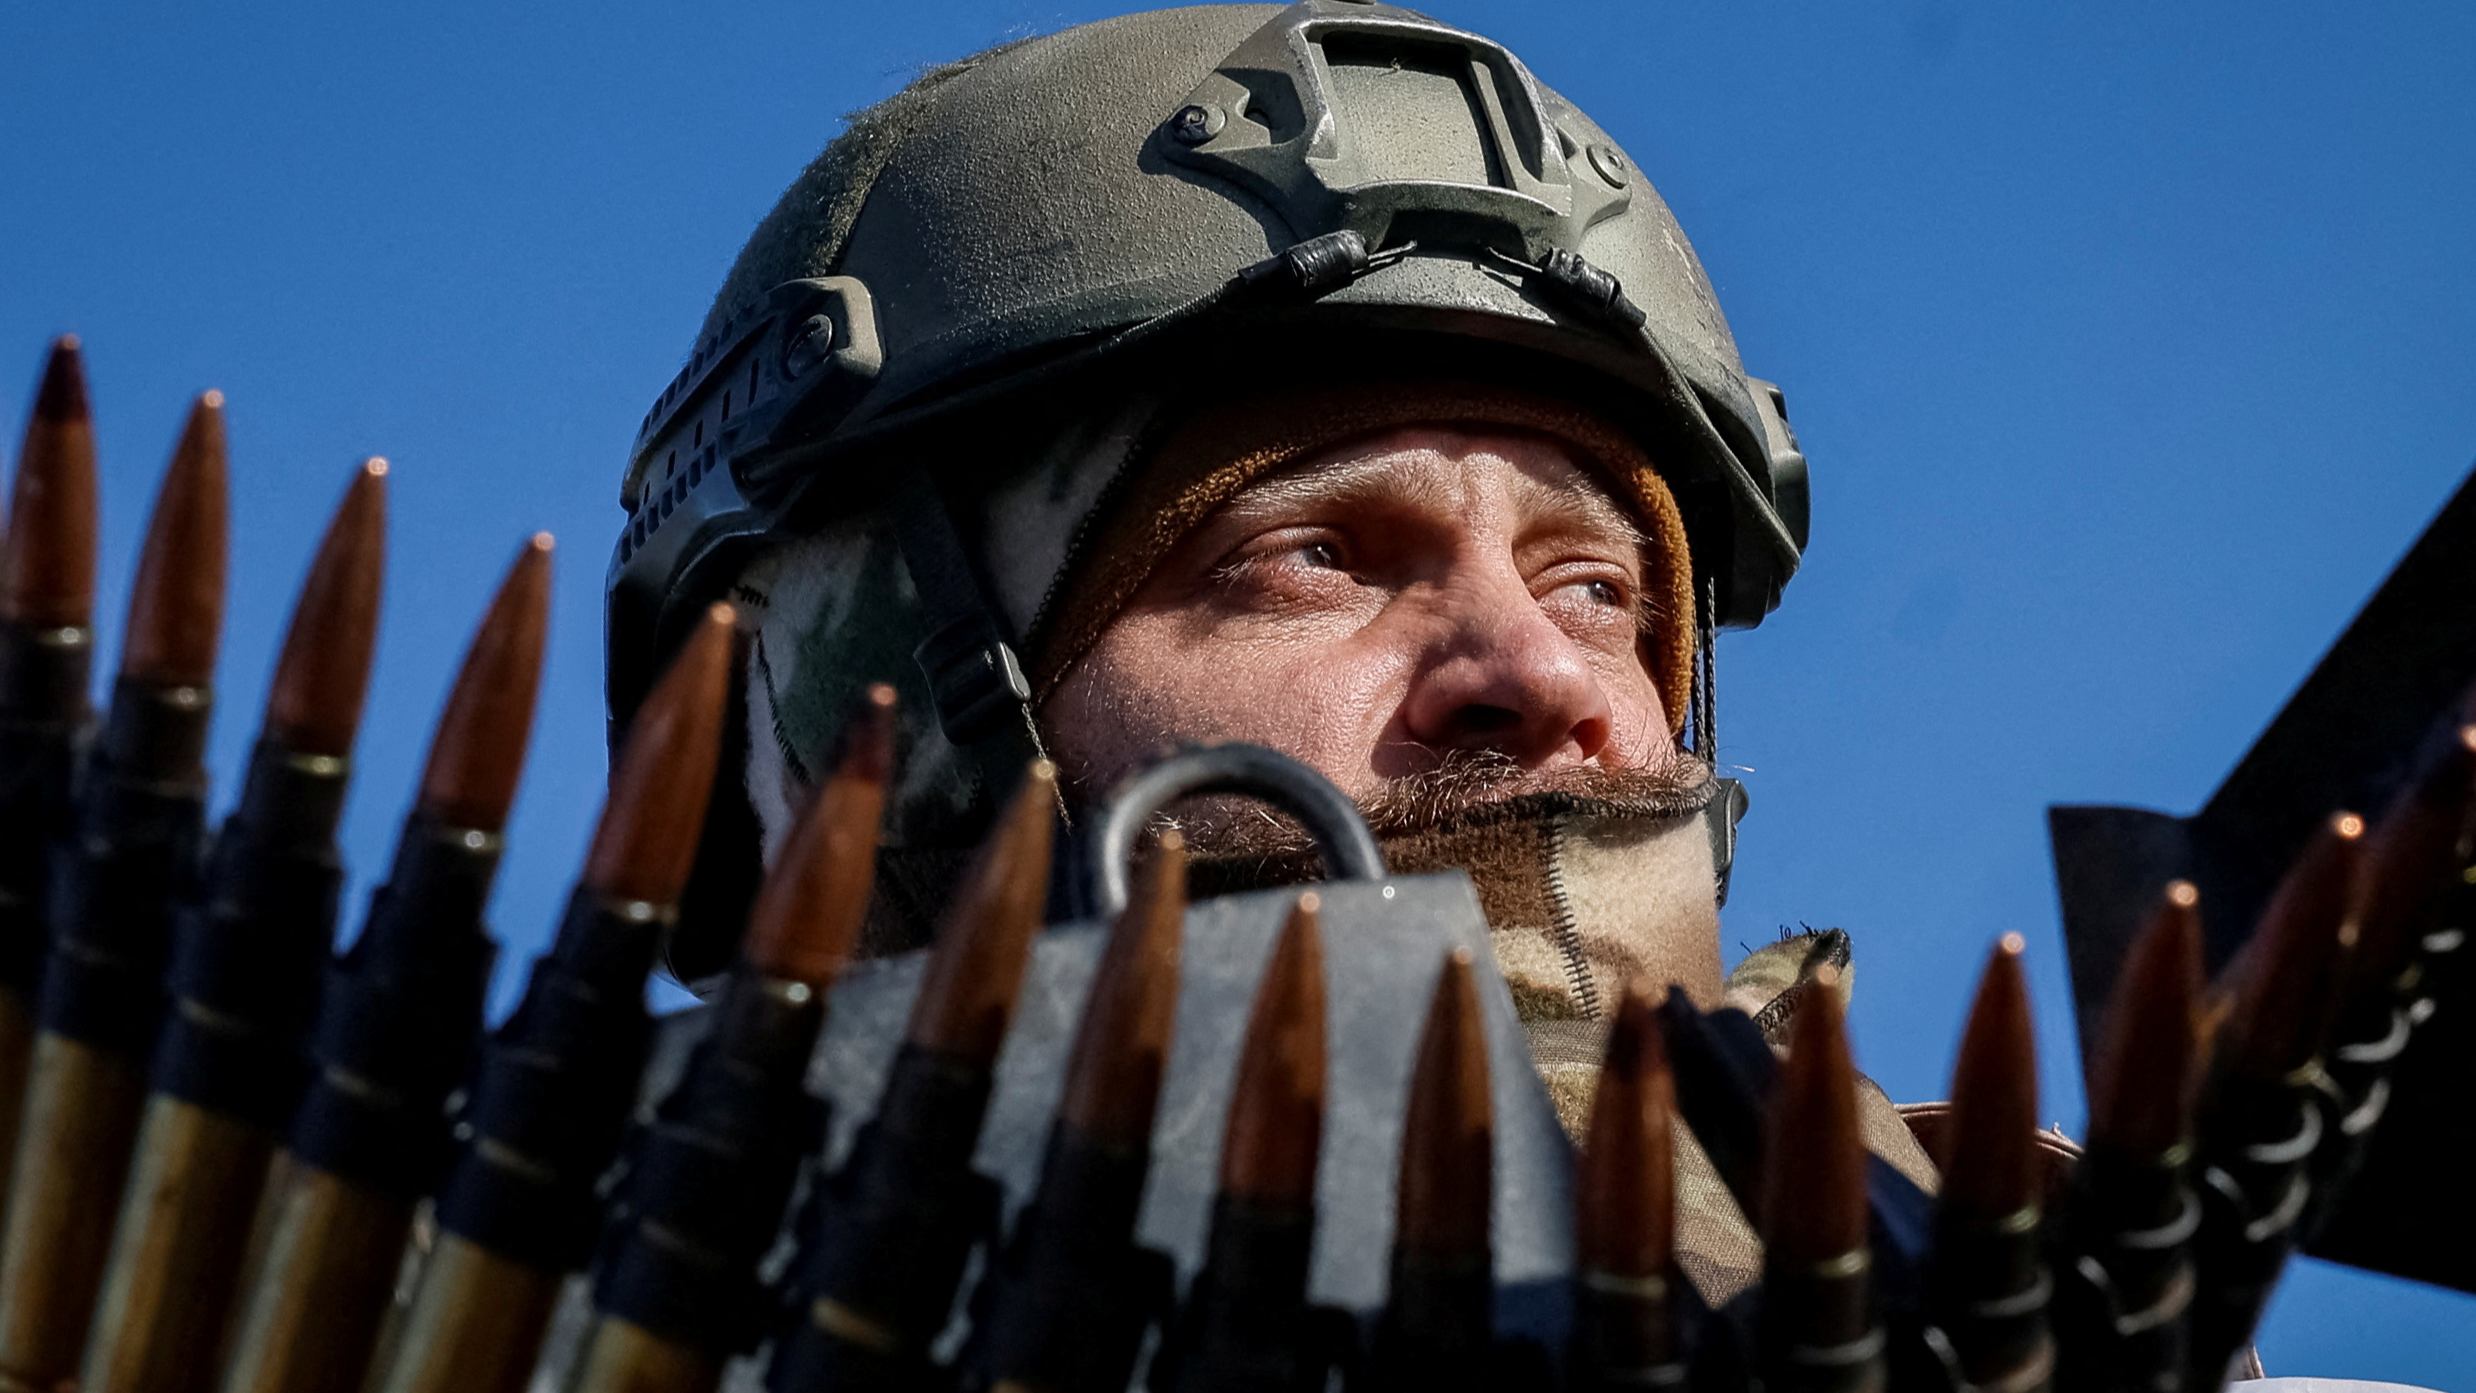 Ukrainian soldiers have been defending their country for nearly two years. /Gleb Garanich/Reuters